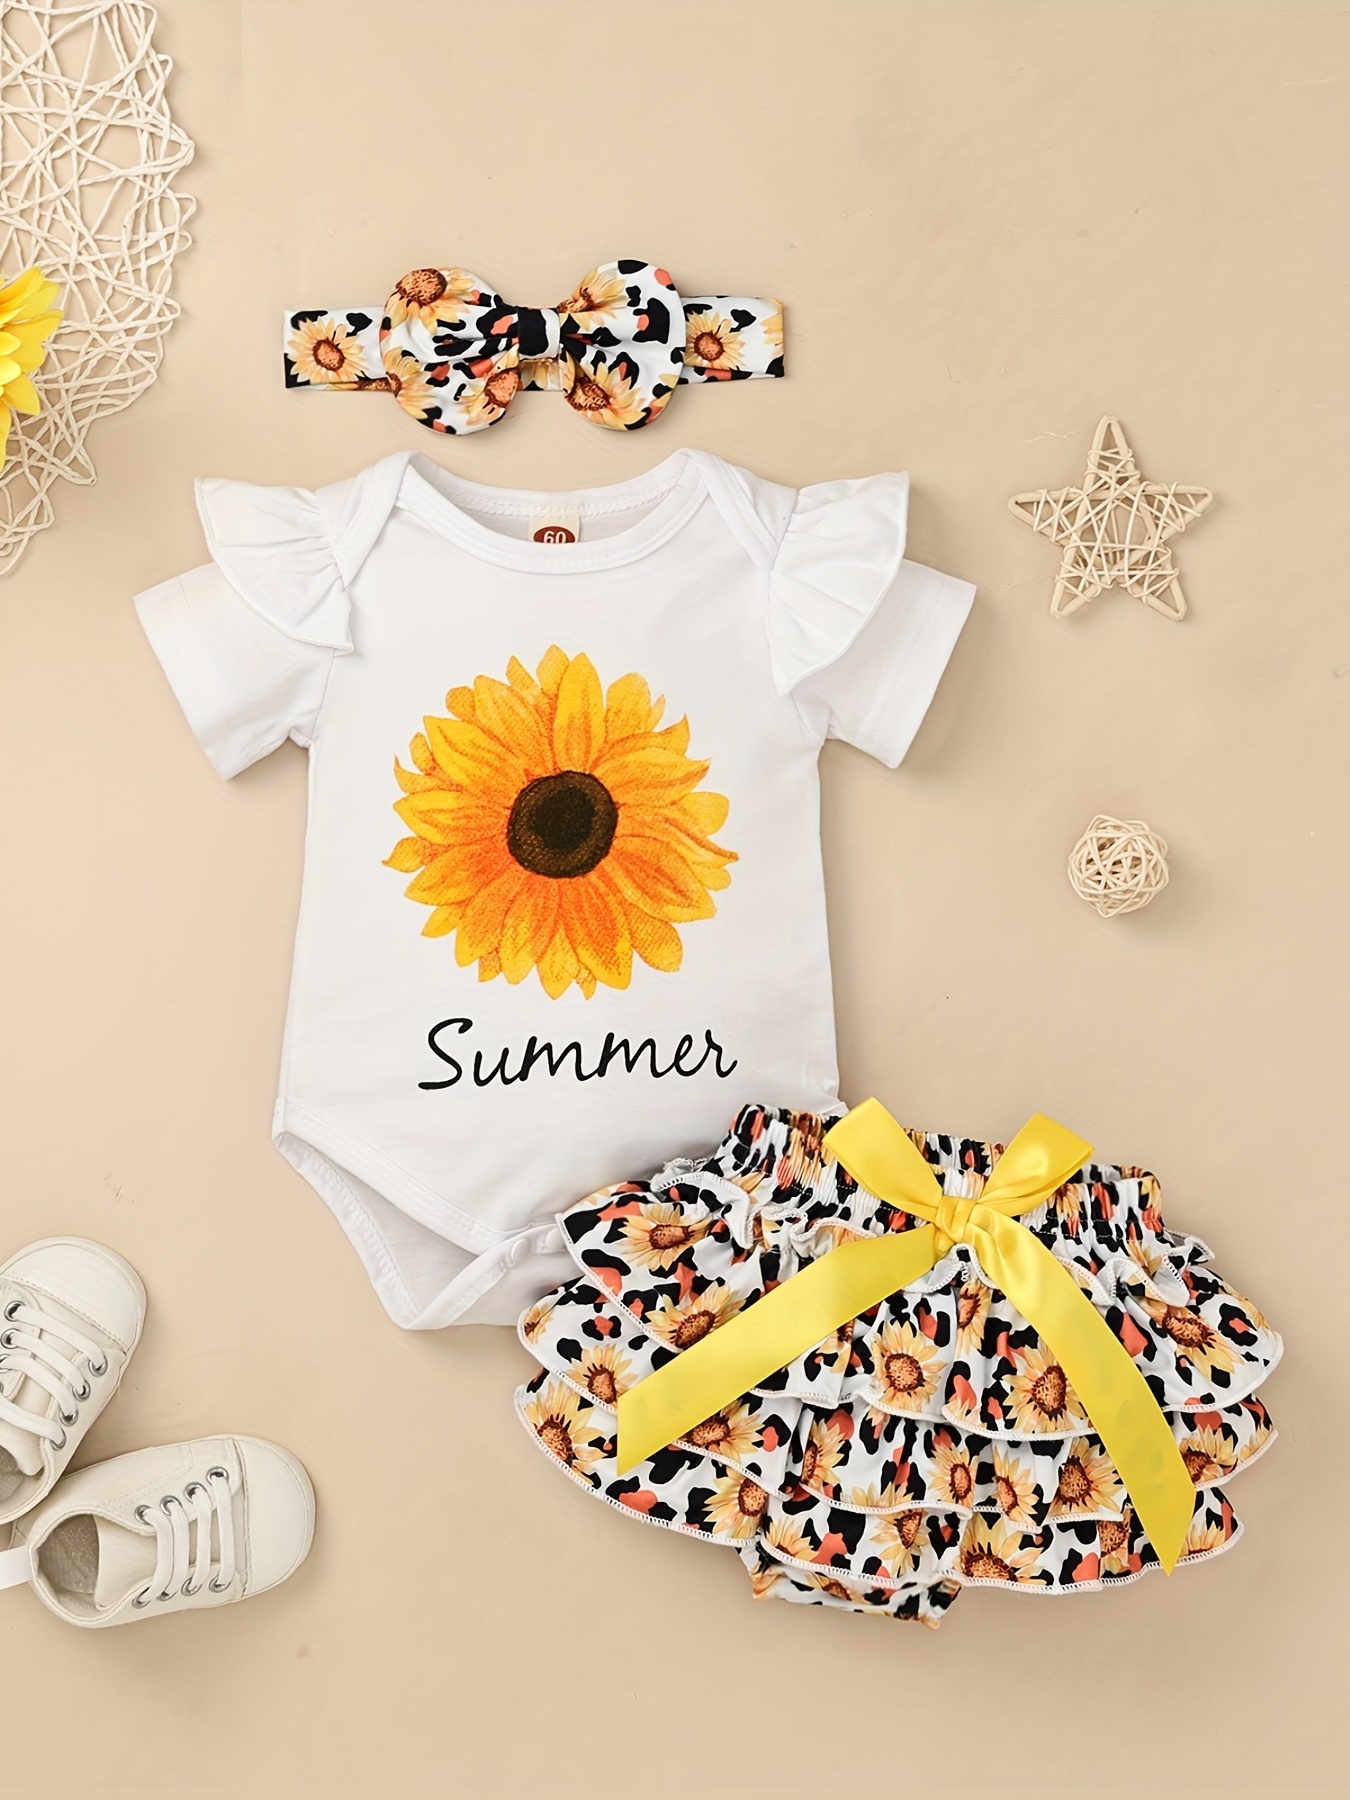 Newborn Infant Baby Girls Tops+Floral Sunflower Shorts+Headbands Outfits